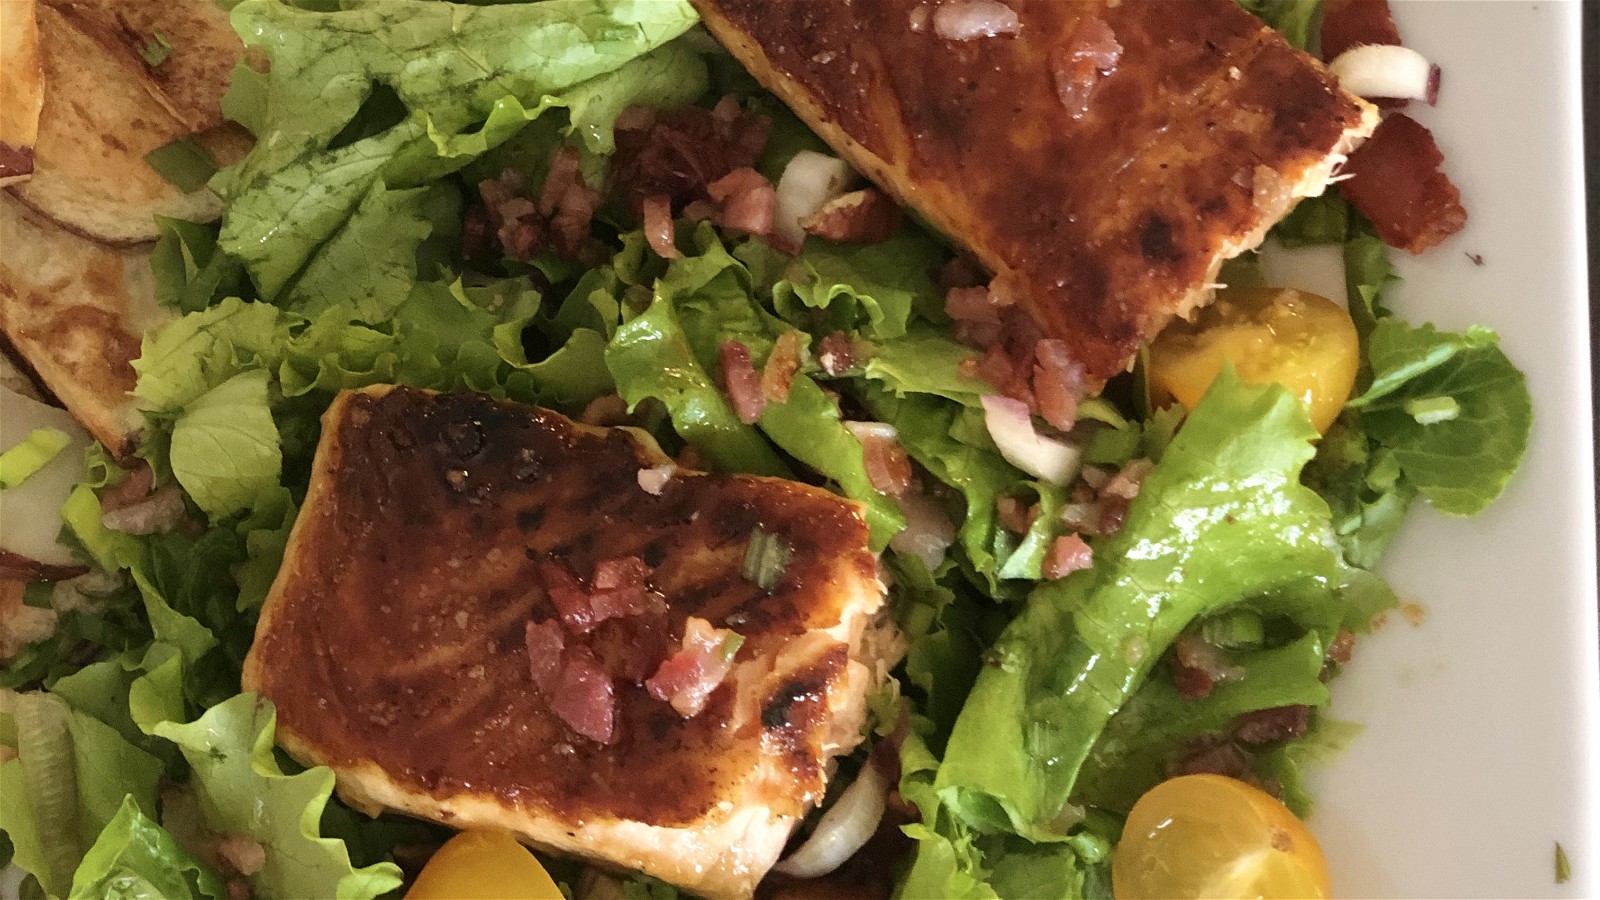 Image of Salmon Salad with Bacon Dressing